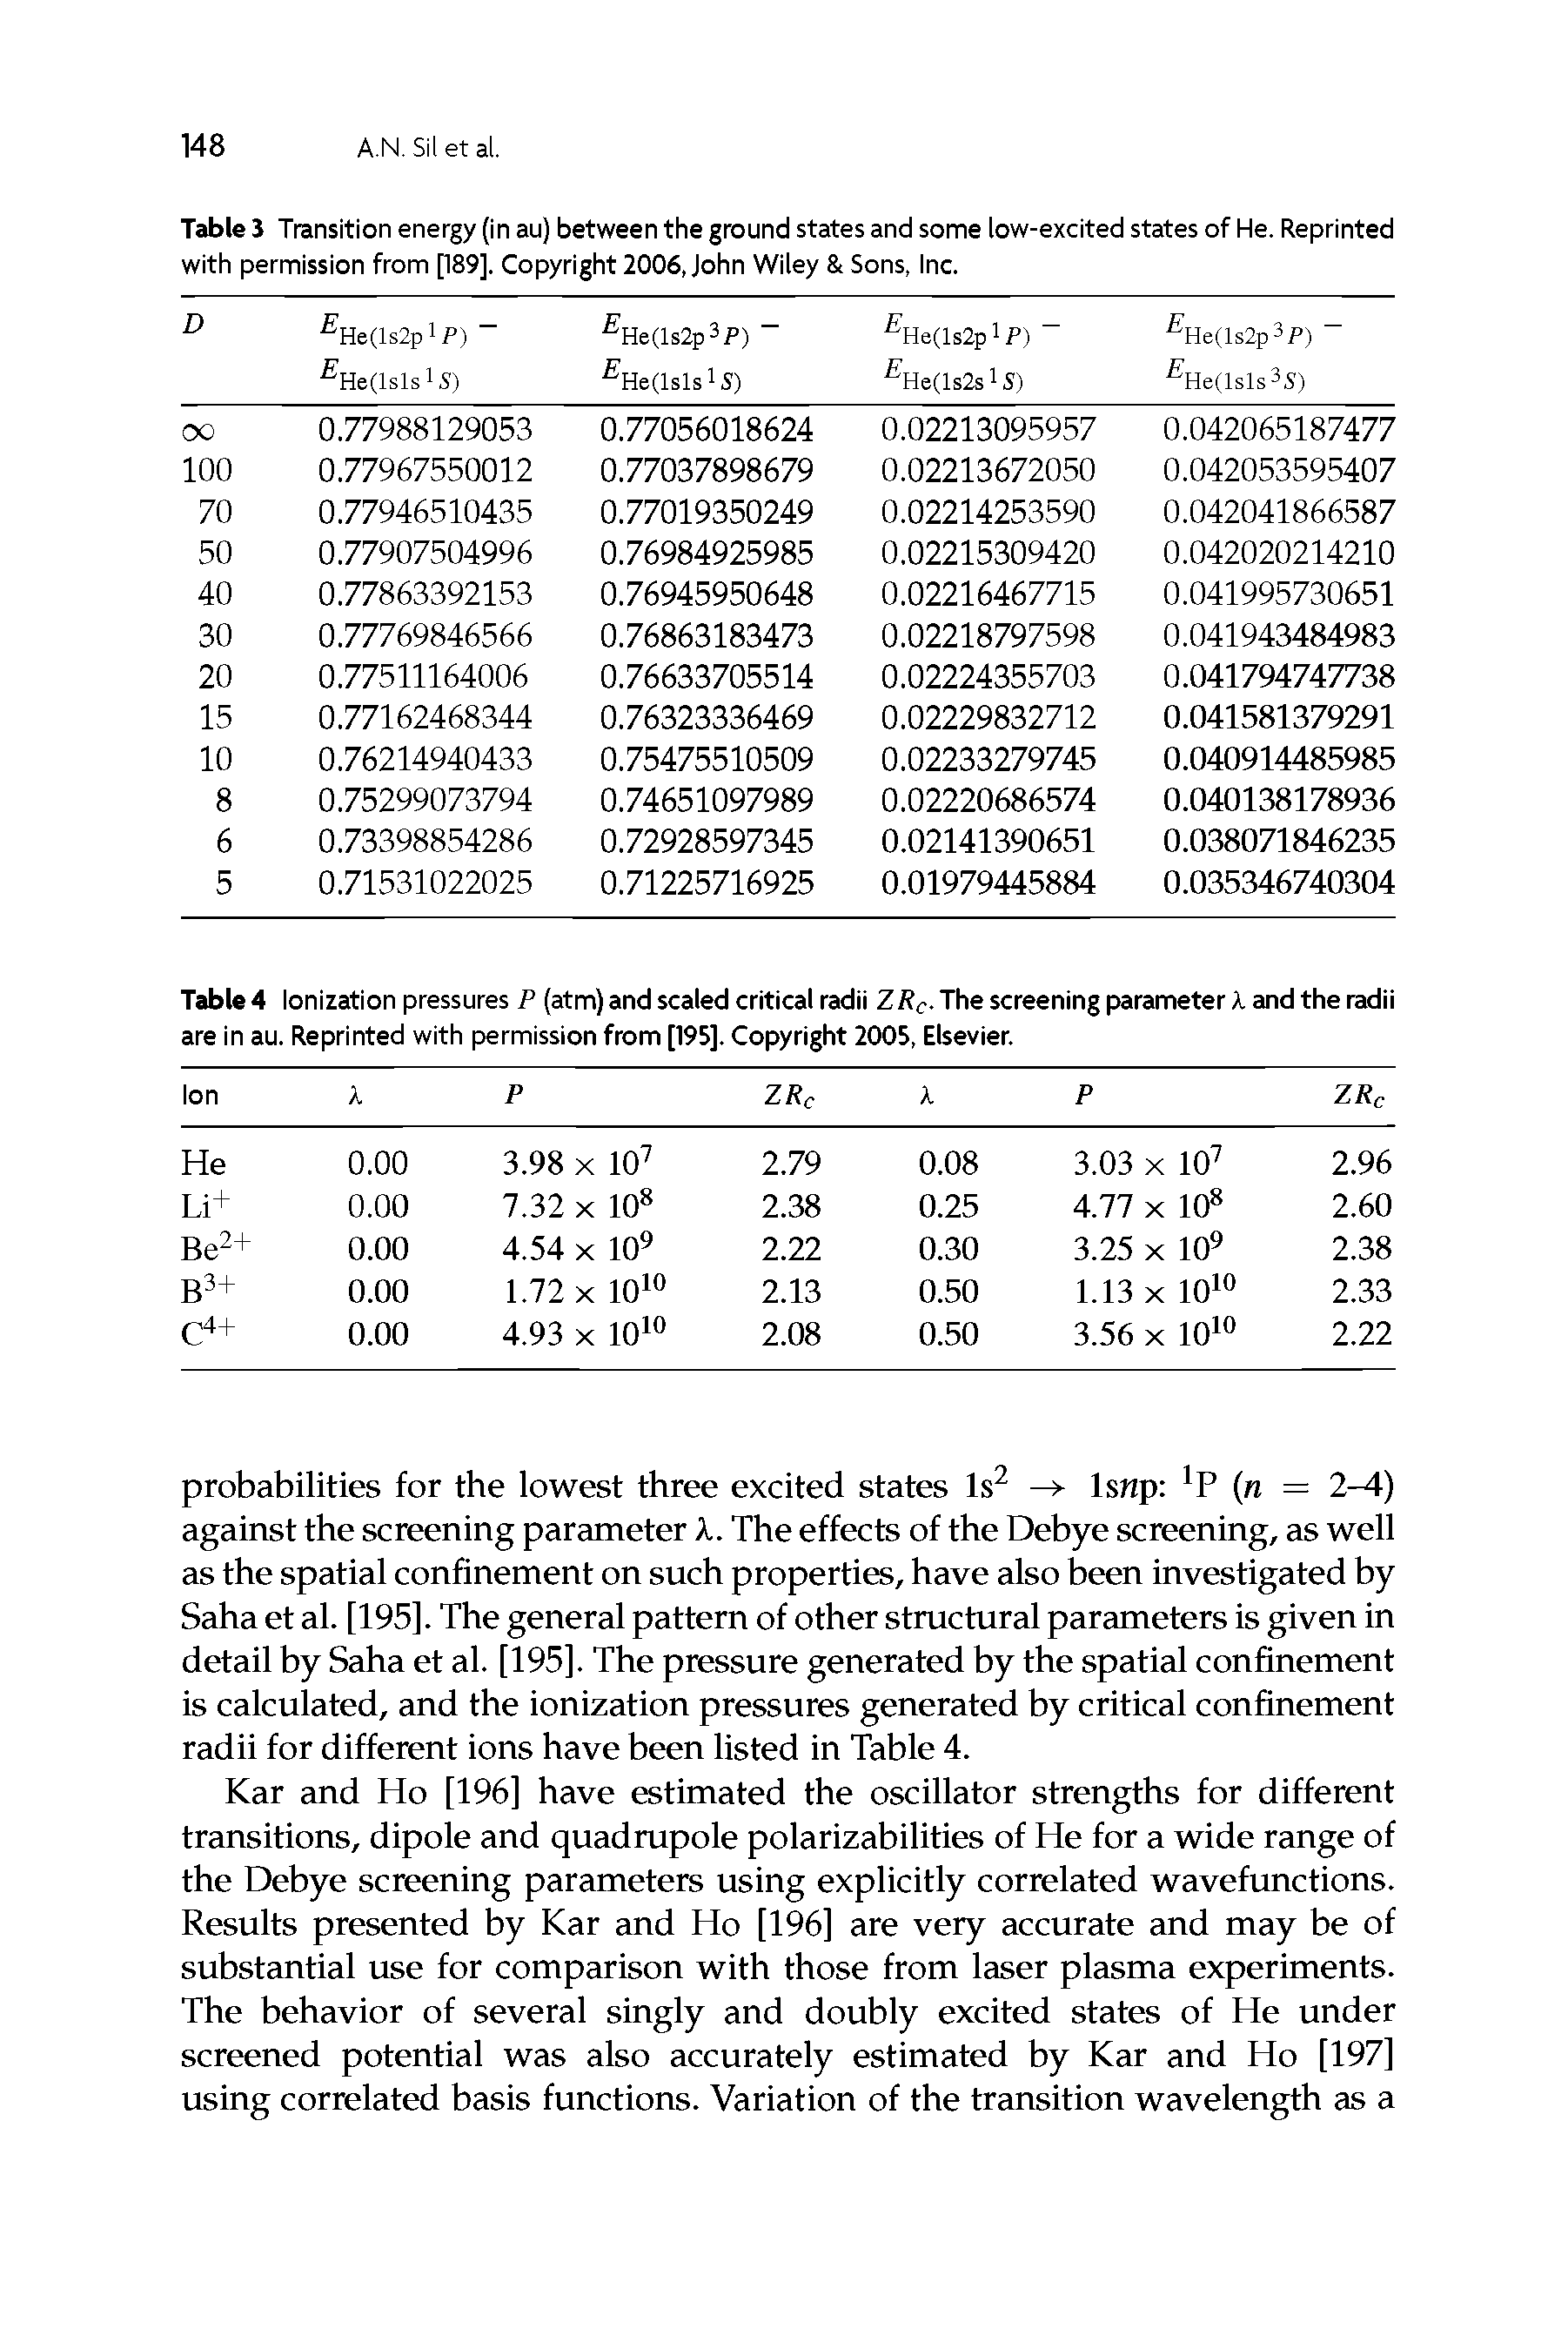 Table 4 Ionization pressures P (atm) and scaled critical radii ZRc. The screening parameter X and the radii are in au. Reprinted with permission from [195]. Copyright 2005, Elsevier.